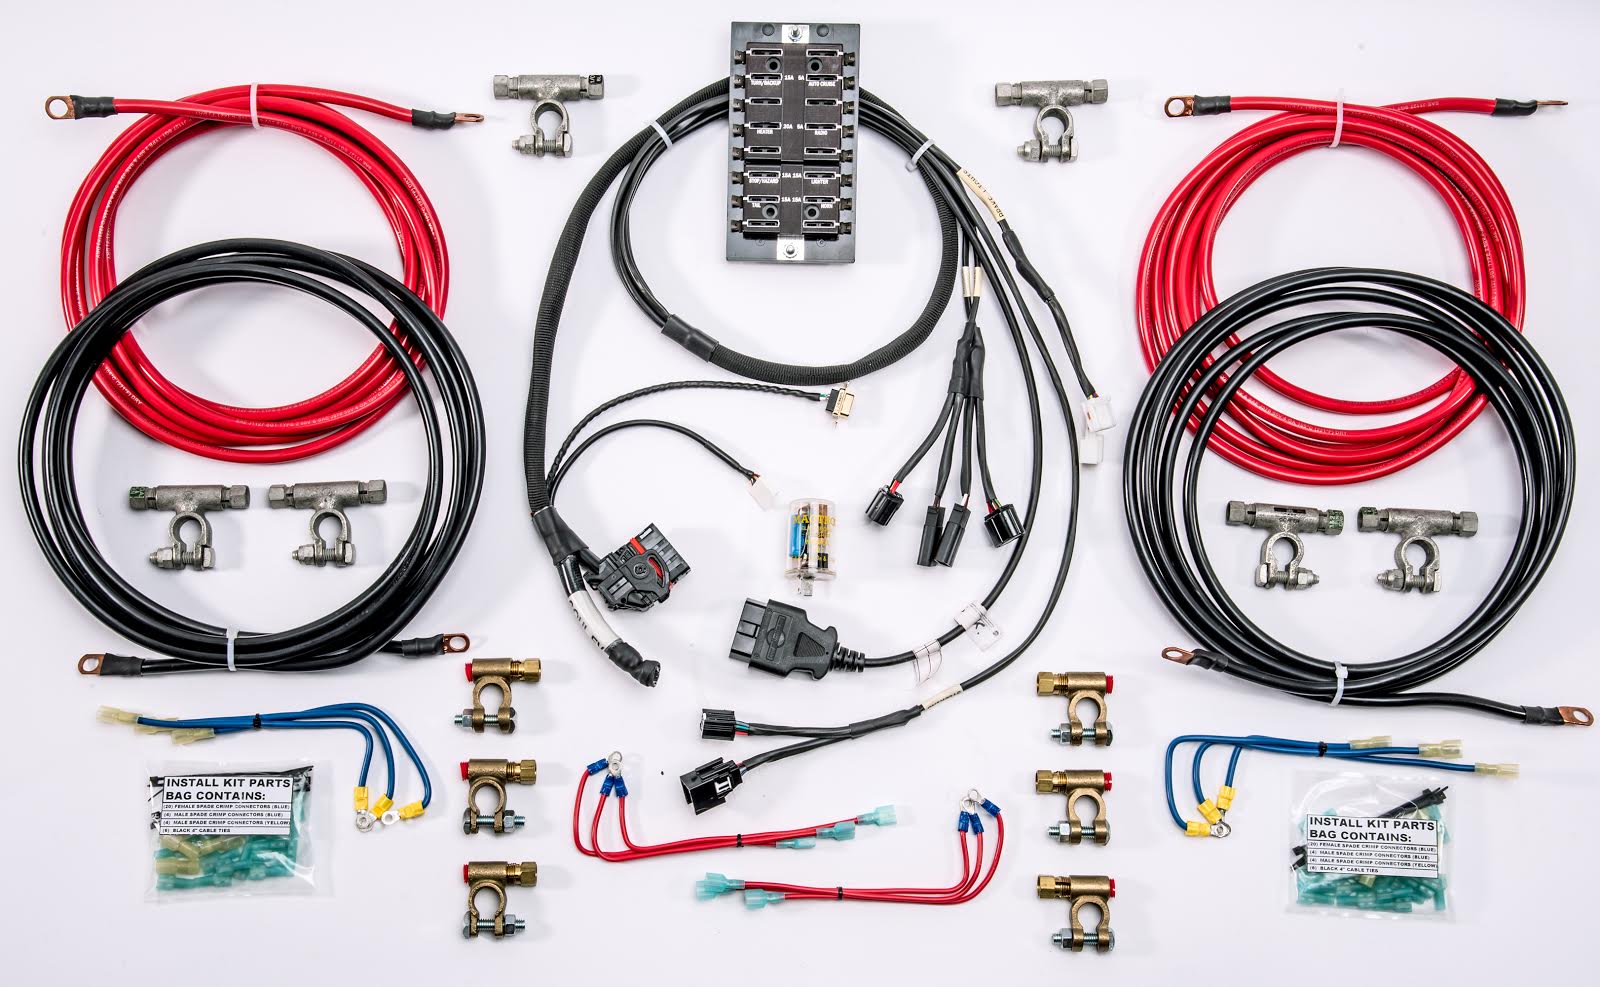 Electric Vehicle Car Wiring Harness Kit - EV Wiring Harness Kit - Generic - Fits Small Cars - Install It Yourself Electric Car Harness